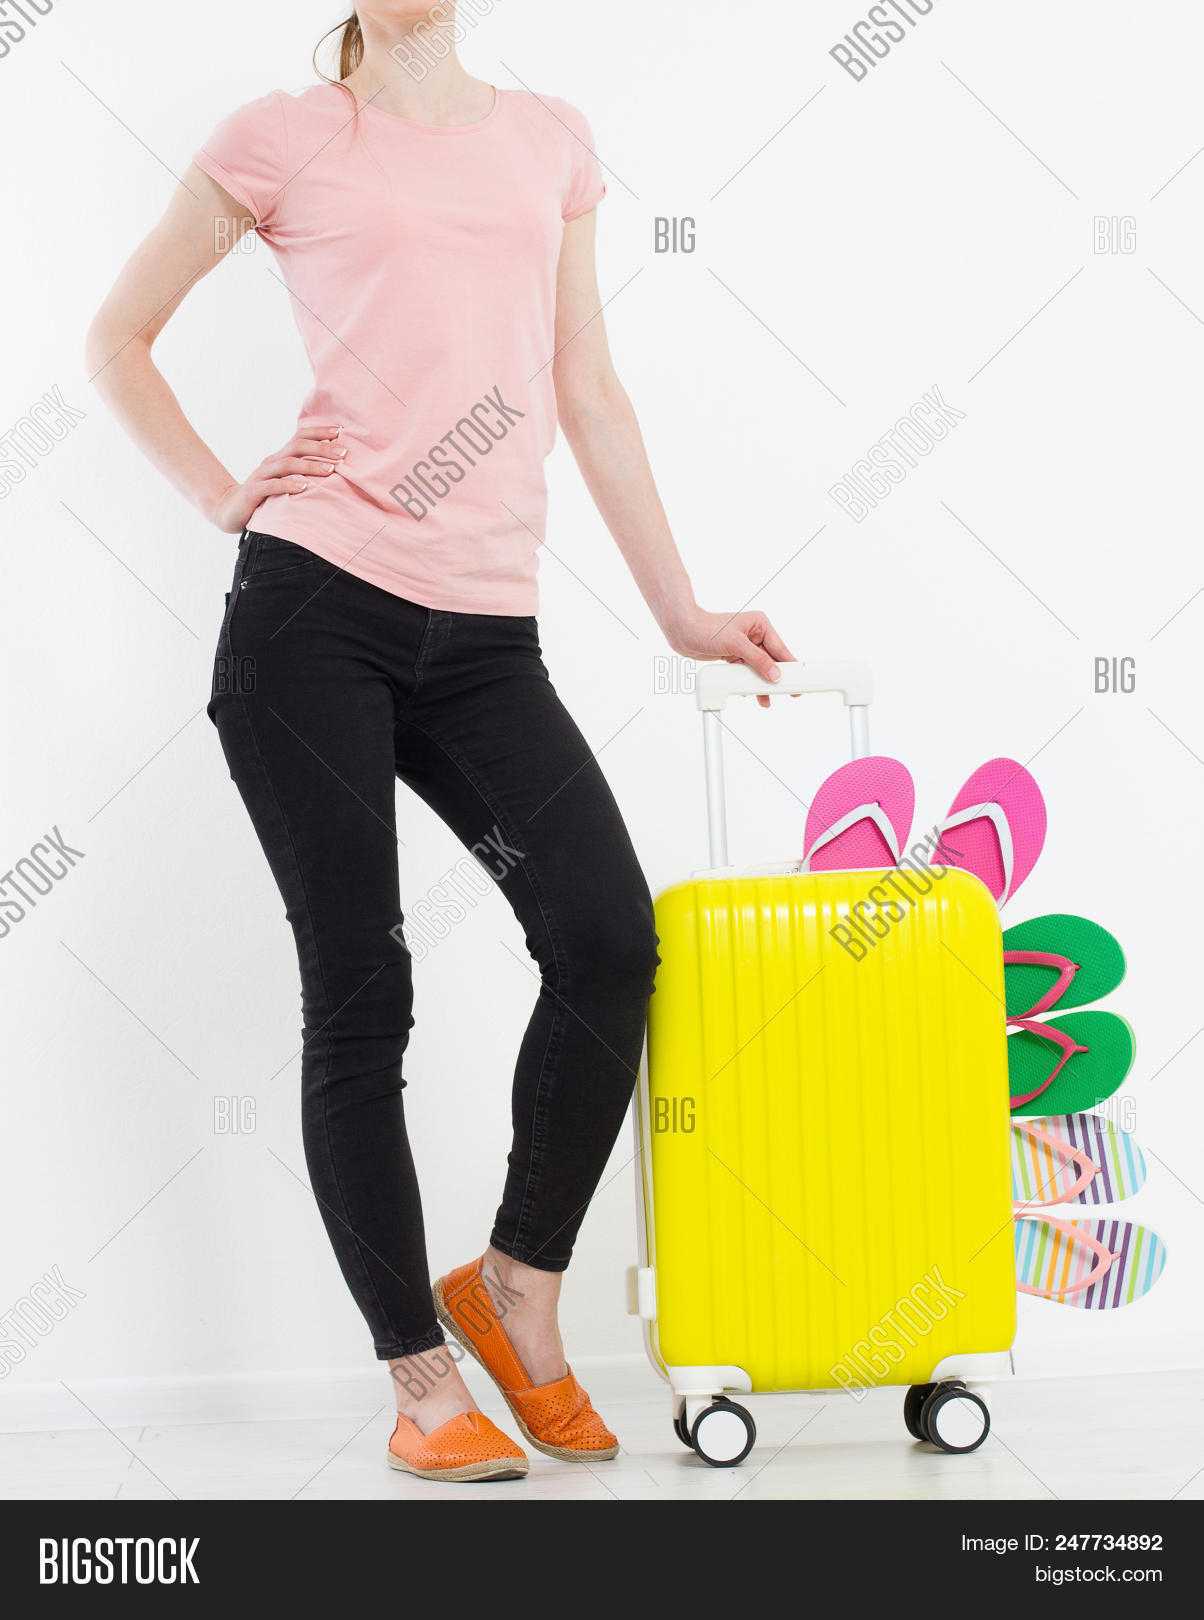 Girl Suitcase Isolated Image & Photo (Free Trial) | Bigstock For Blank Suitcase Template